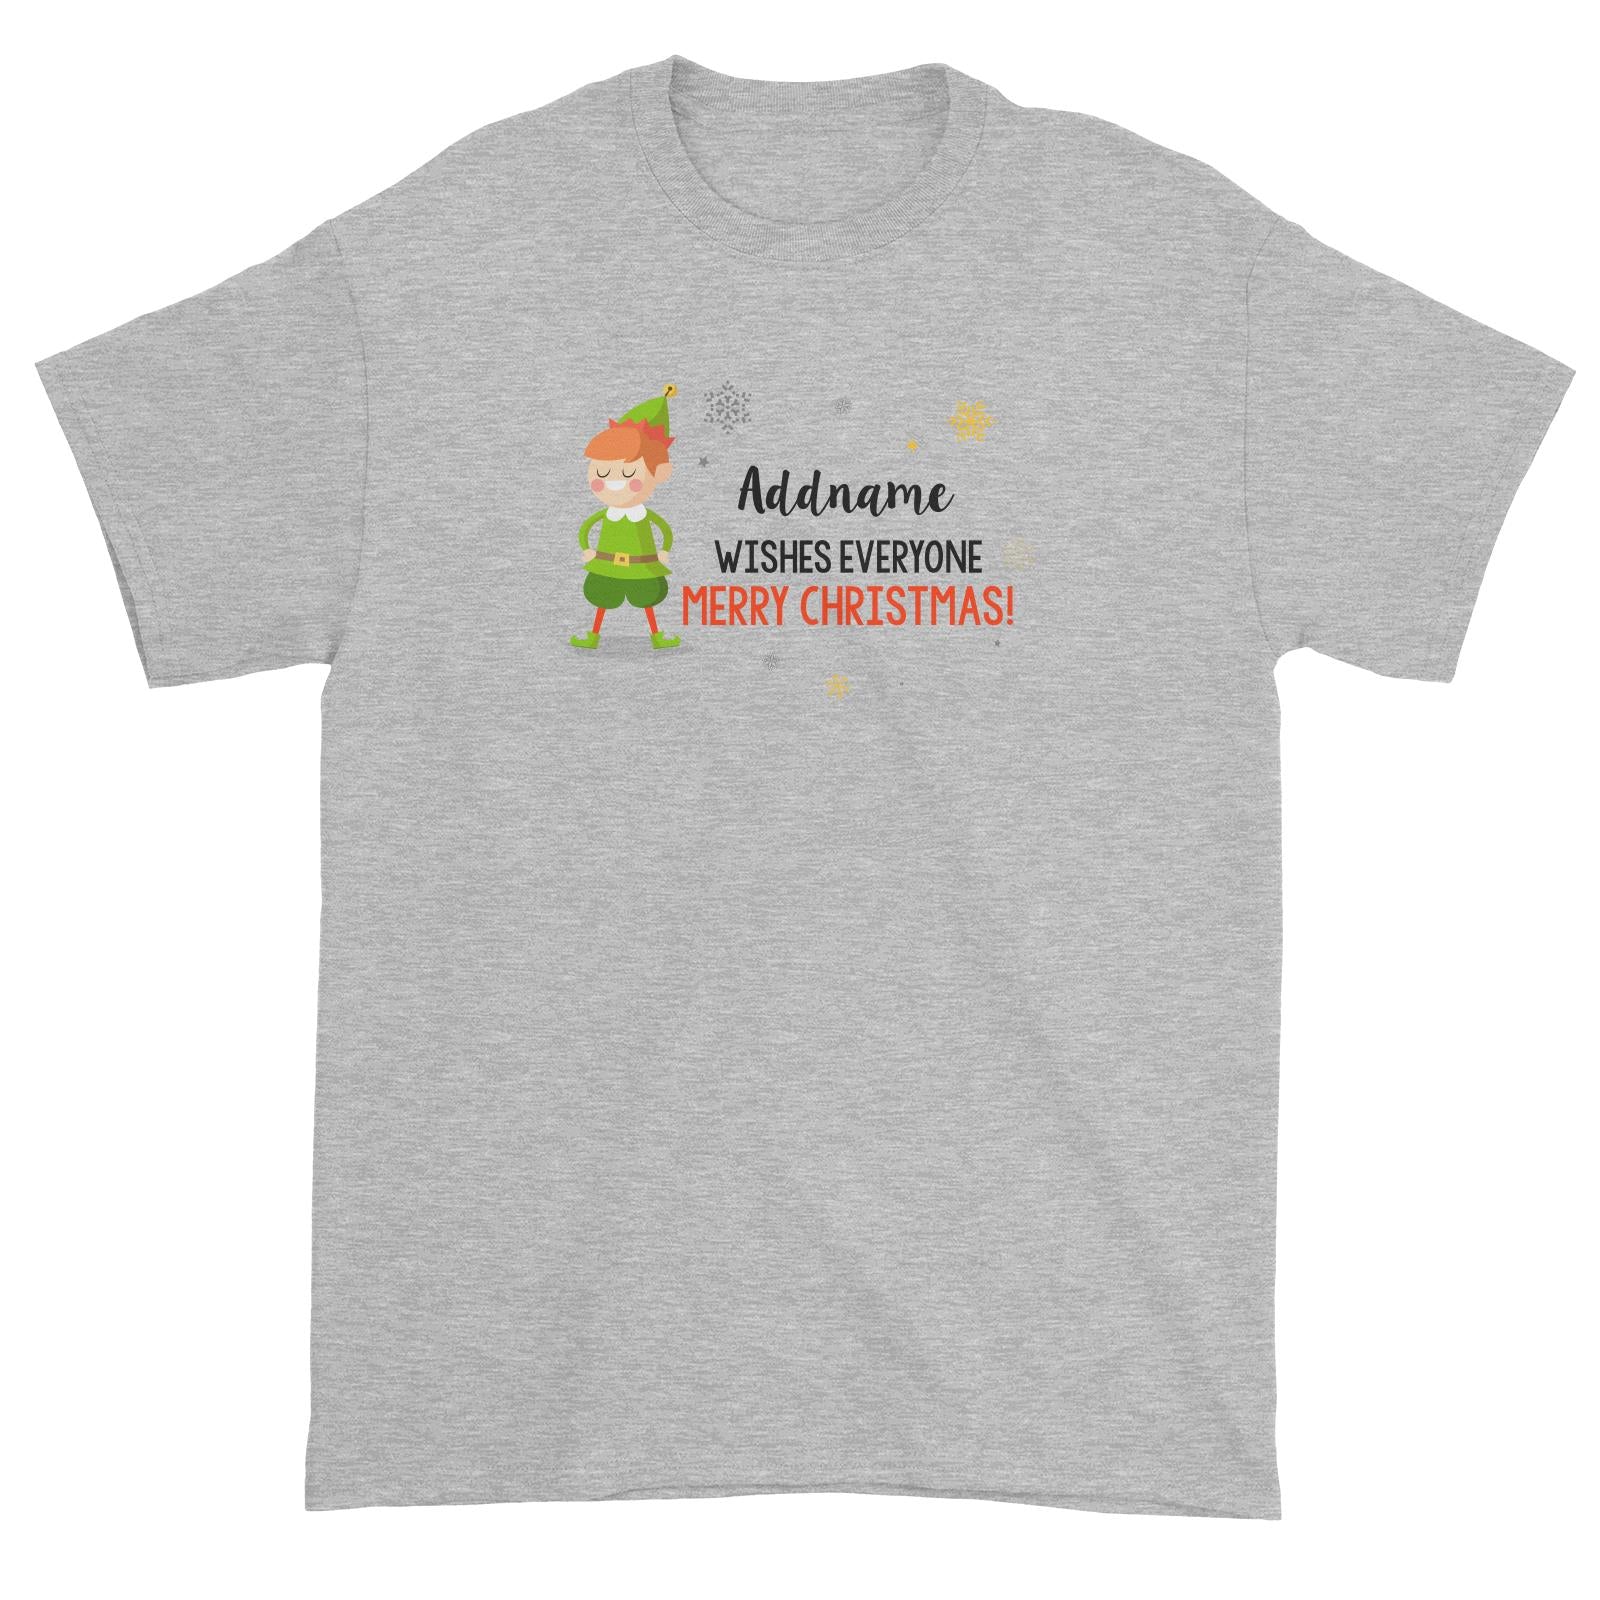 Cute Elf Man Wishes Everyone Merry Christmas Addname Unisex T-Shirt  Matching Family Personalizable Designs